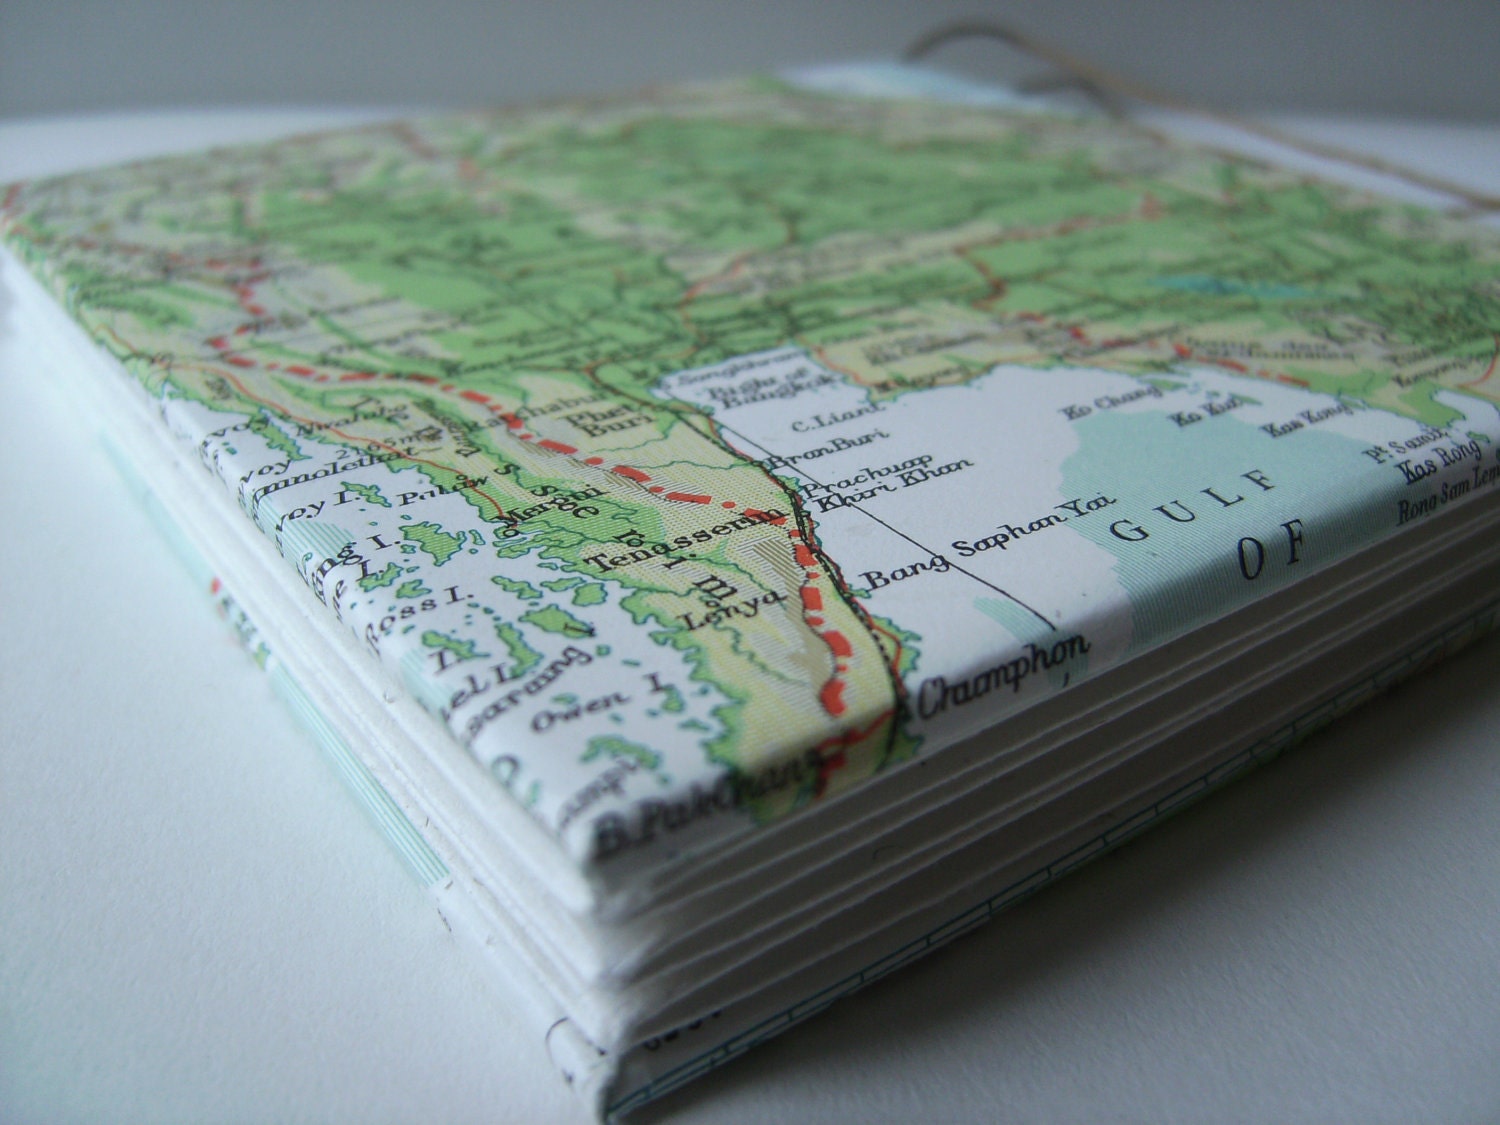 Vintage map travel journal / scrapbook / notebook - South East Asia